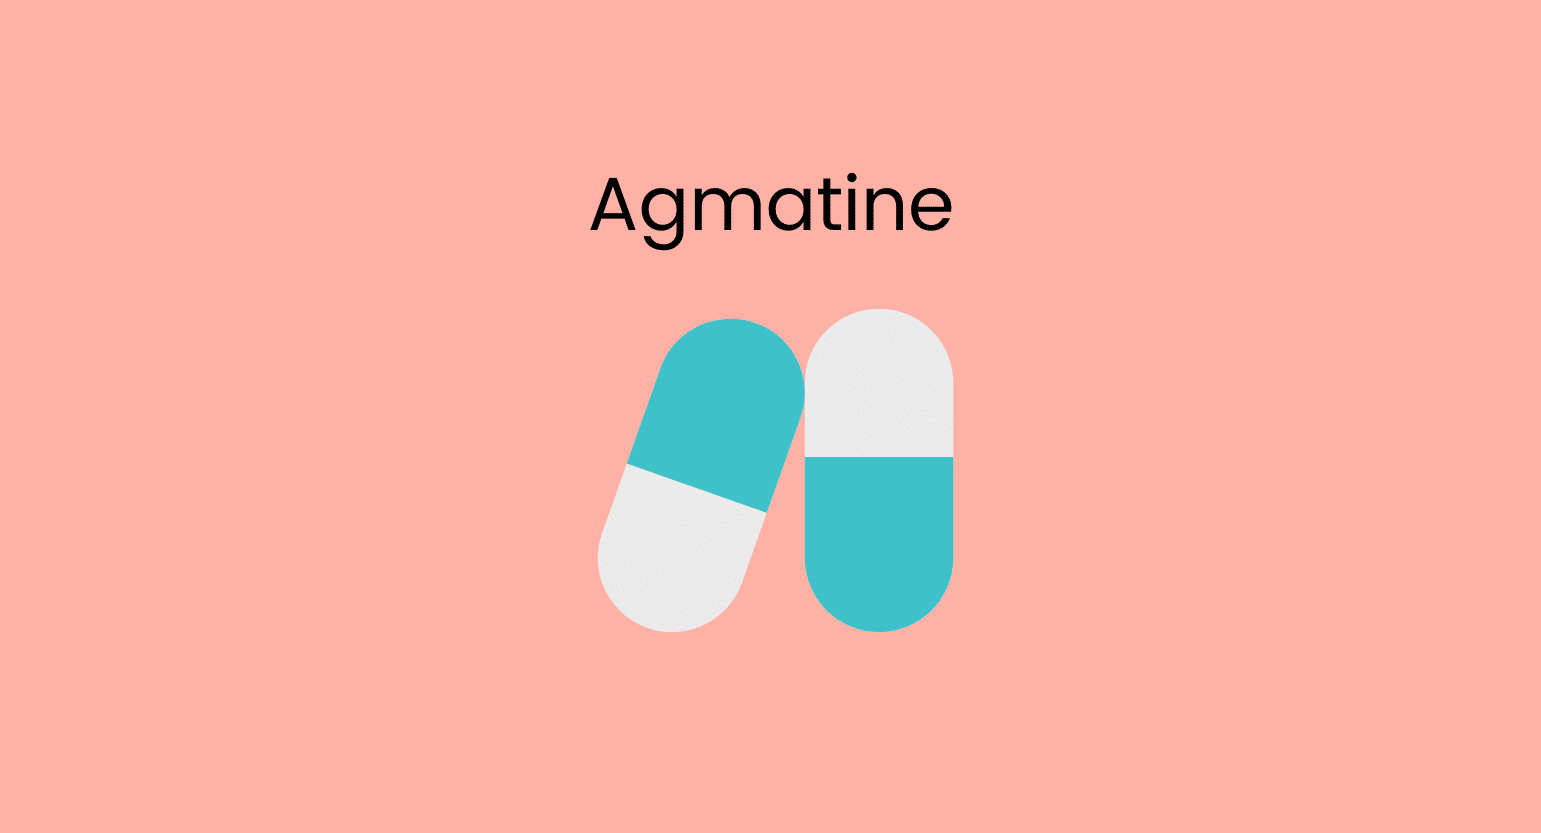 Kratom & Agmatine (AgmaSet): Is This a Safe Combo?